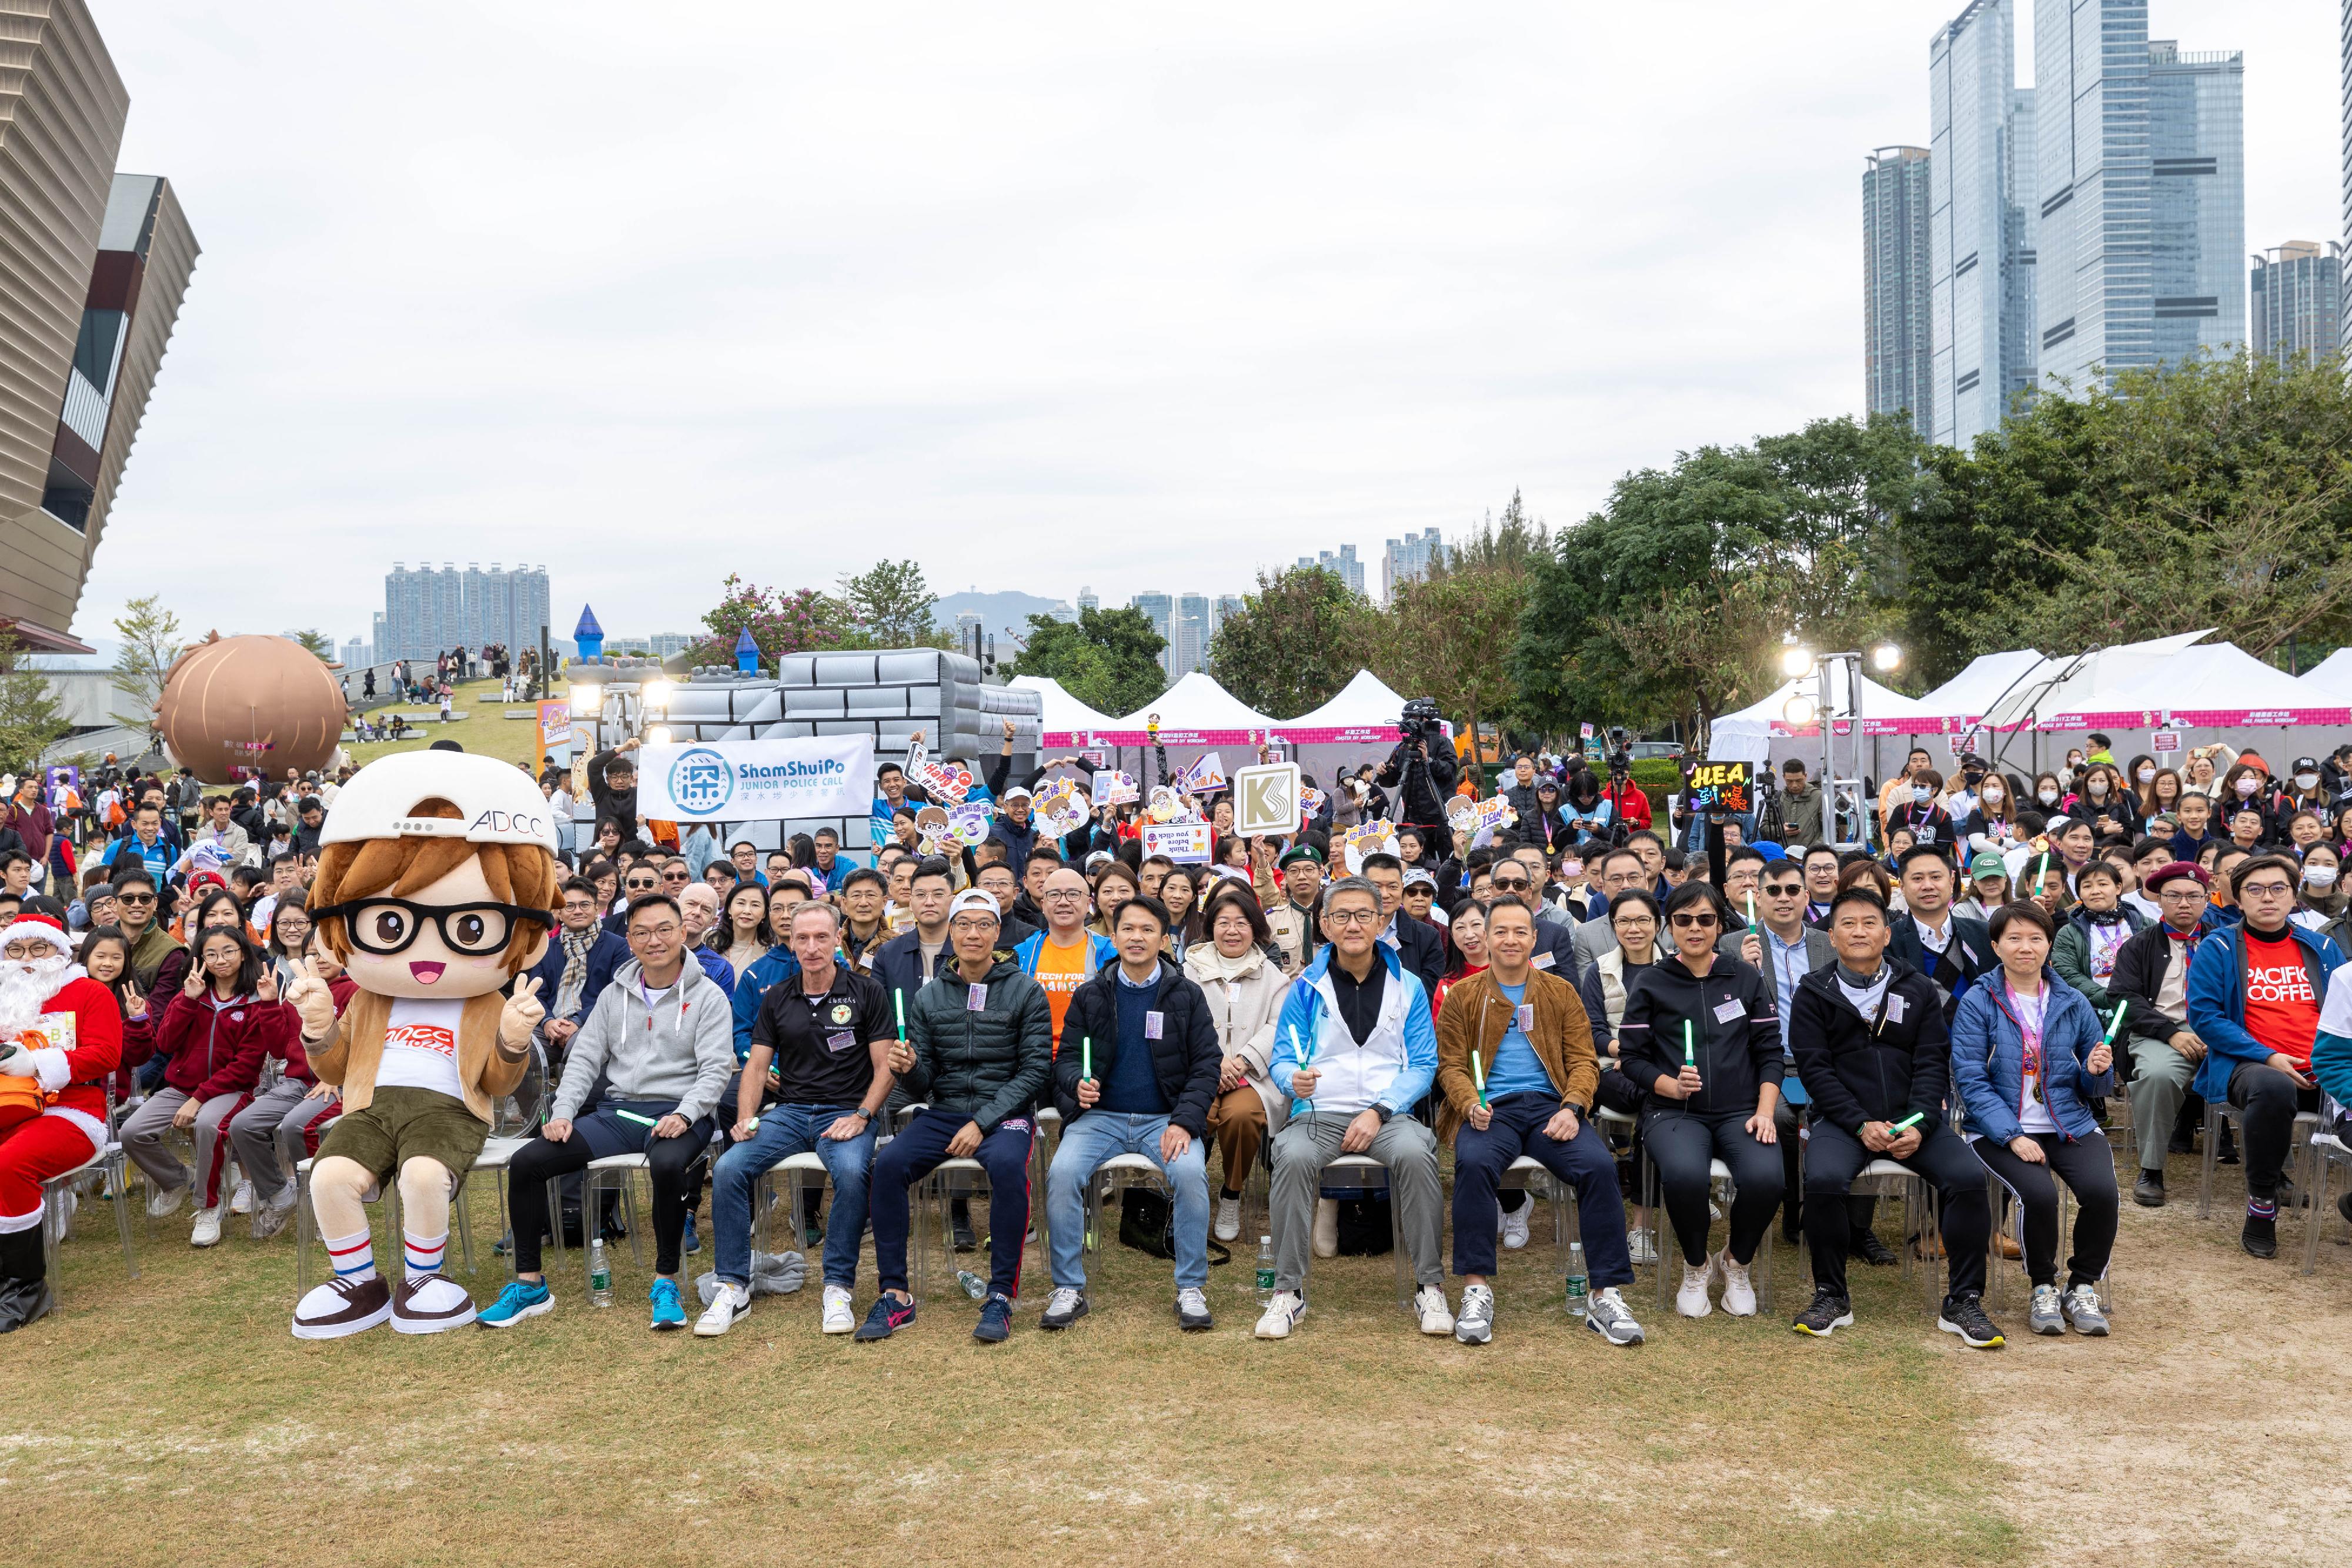 The Anti-Deception Coordination Centre of the Hong Kong Police Force organises the "West Kowloon CHILL RUN Winter Market cum Anti-Scam Charity Run 2023" at the West Kowloon Cultural District today (December 17), which attracted over a thousand members of the public to join. Photo shows the Commissioner of Police, Mr Siu Chak-yee (front row, fifth right) with other guests and members of the public.